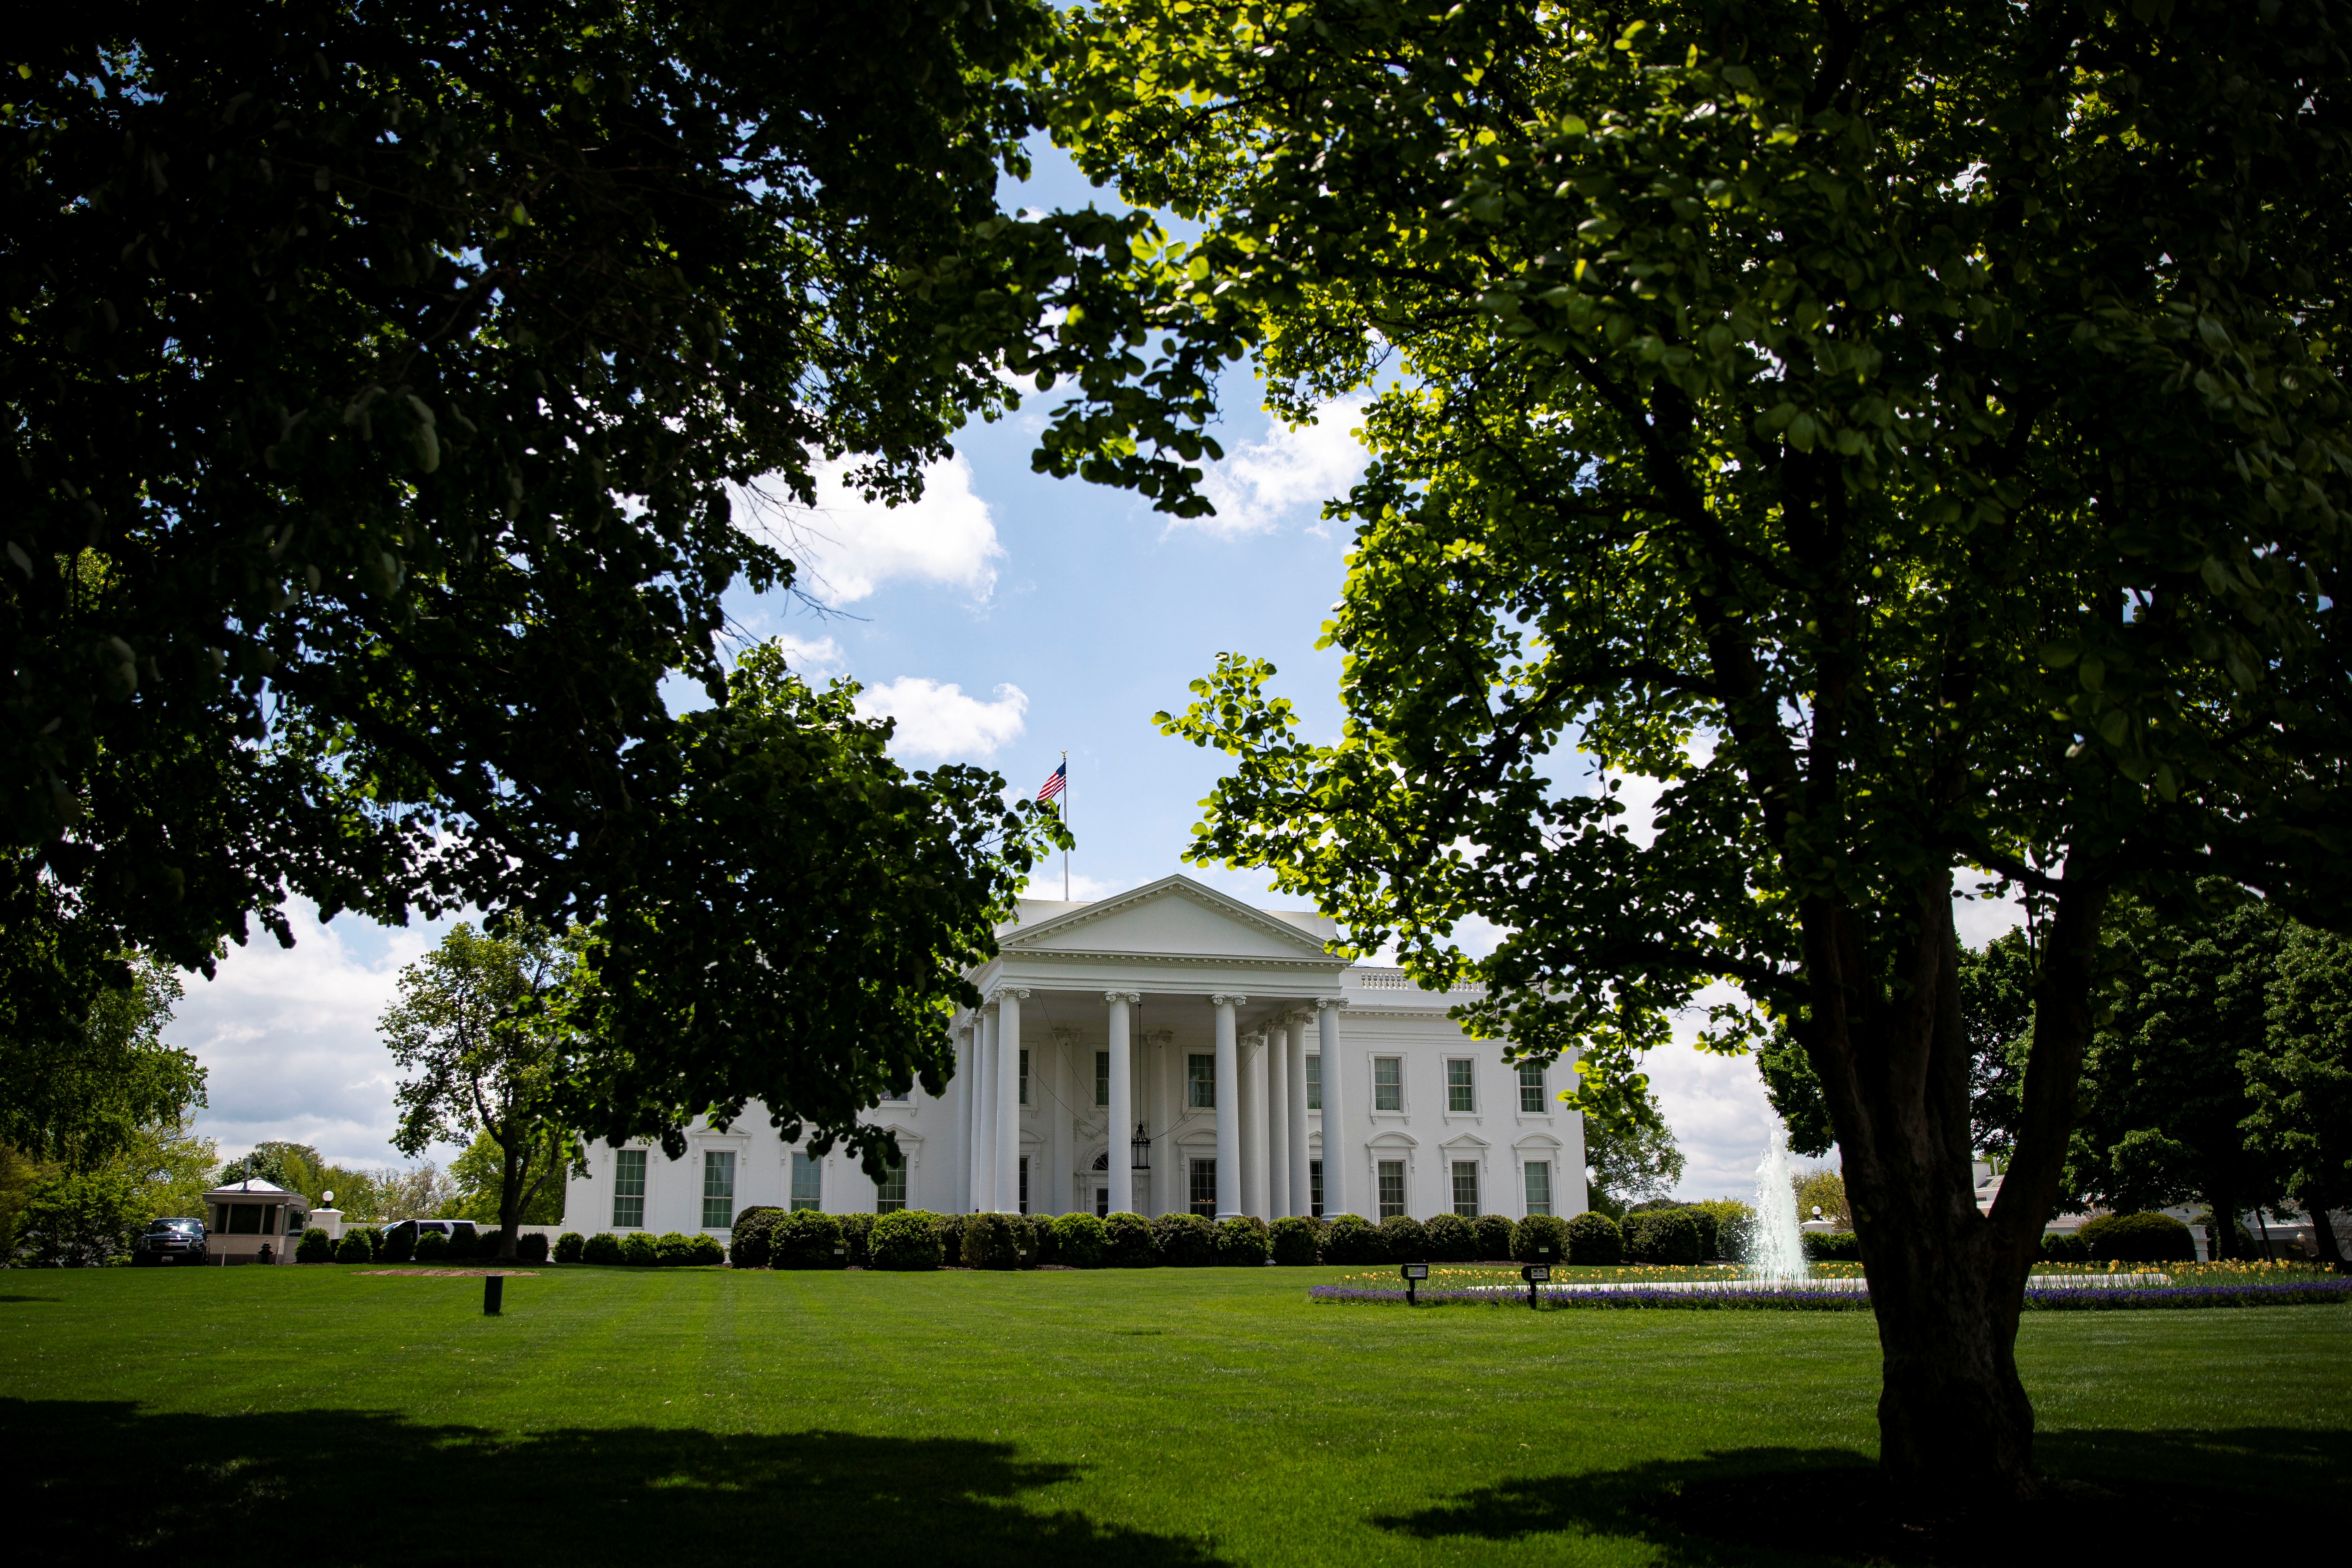 The White House is pictured in Washington